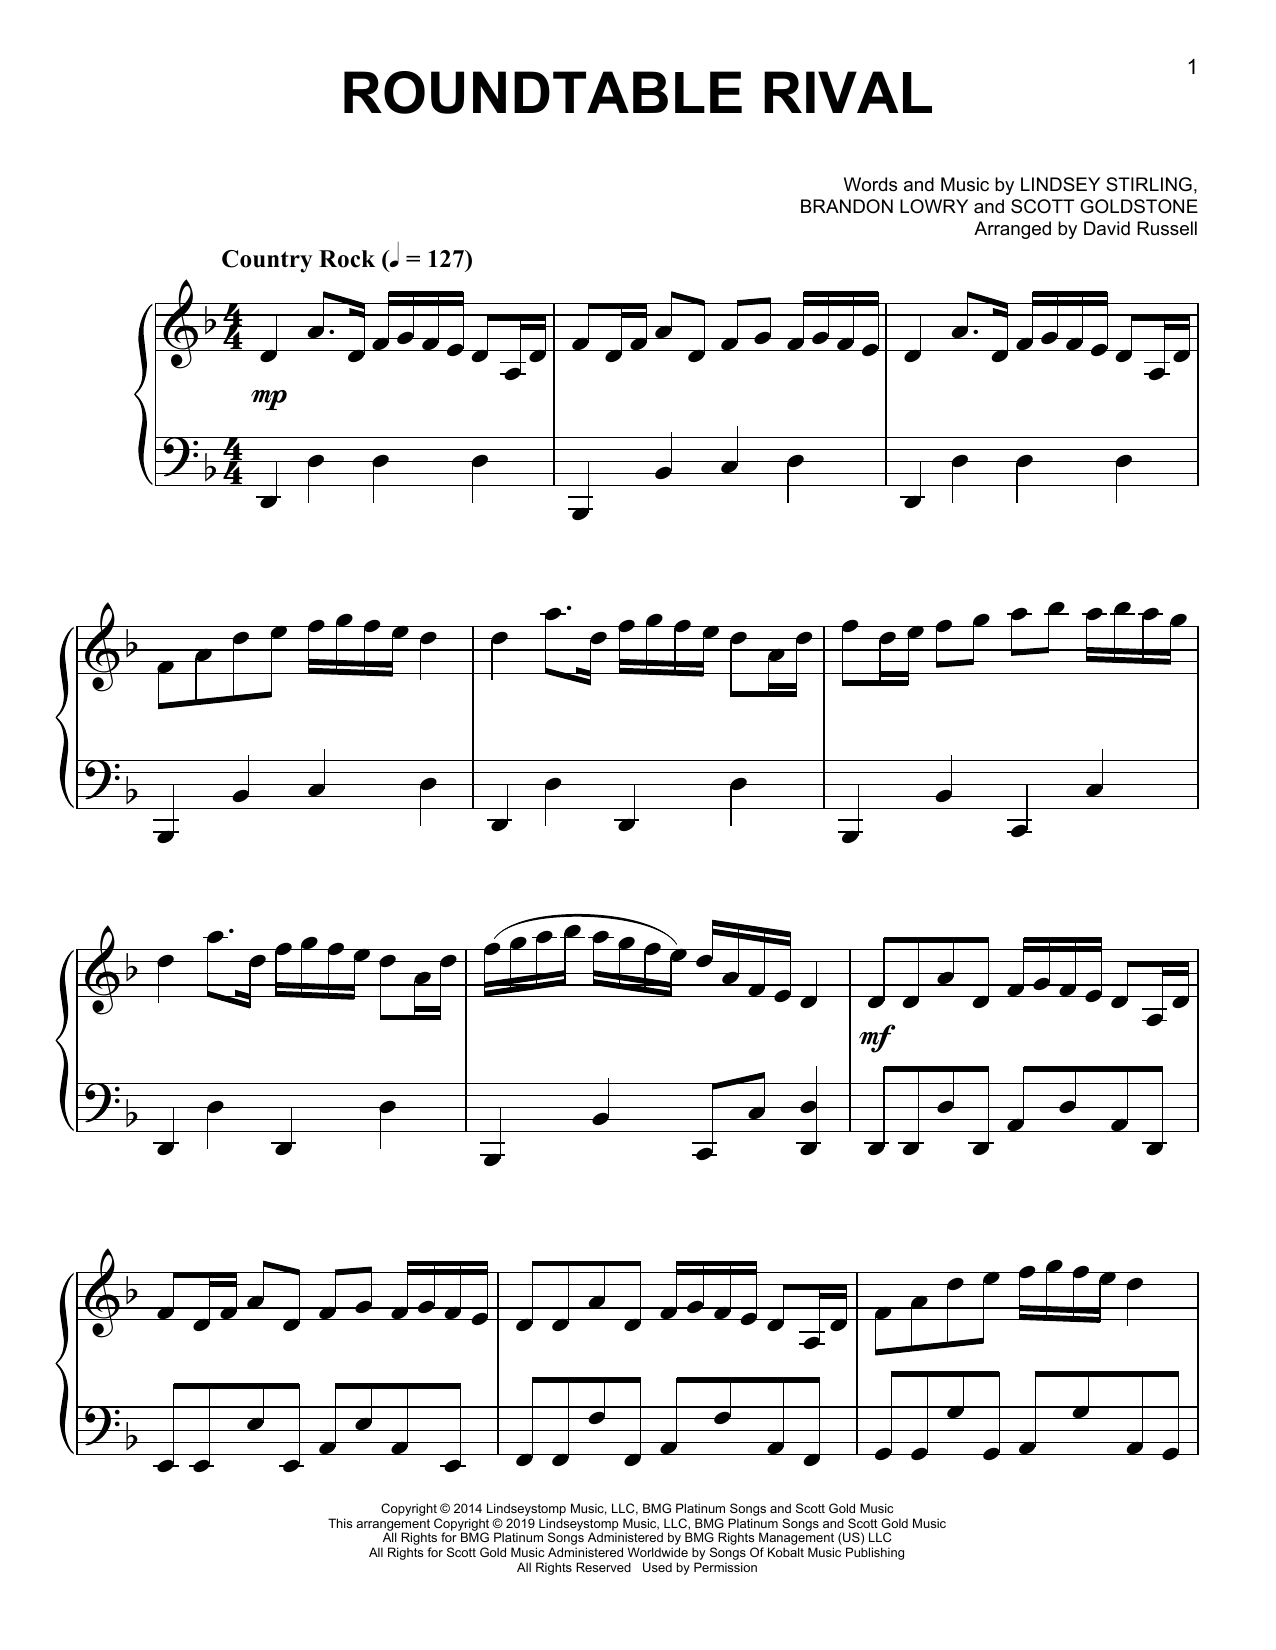 Lindsey Stirling Roundtable Rival sheet music notes and chords. Download Printable PDF.